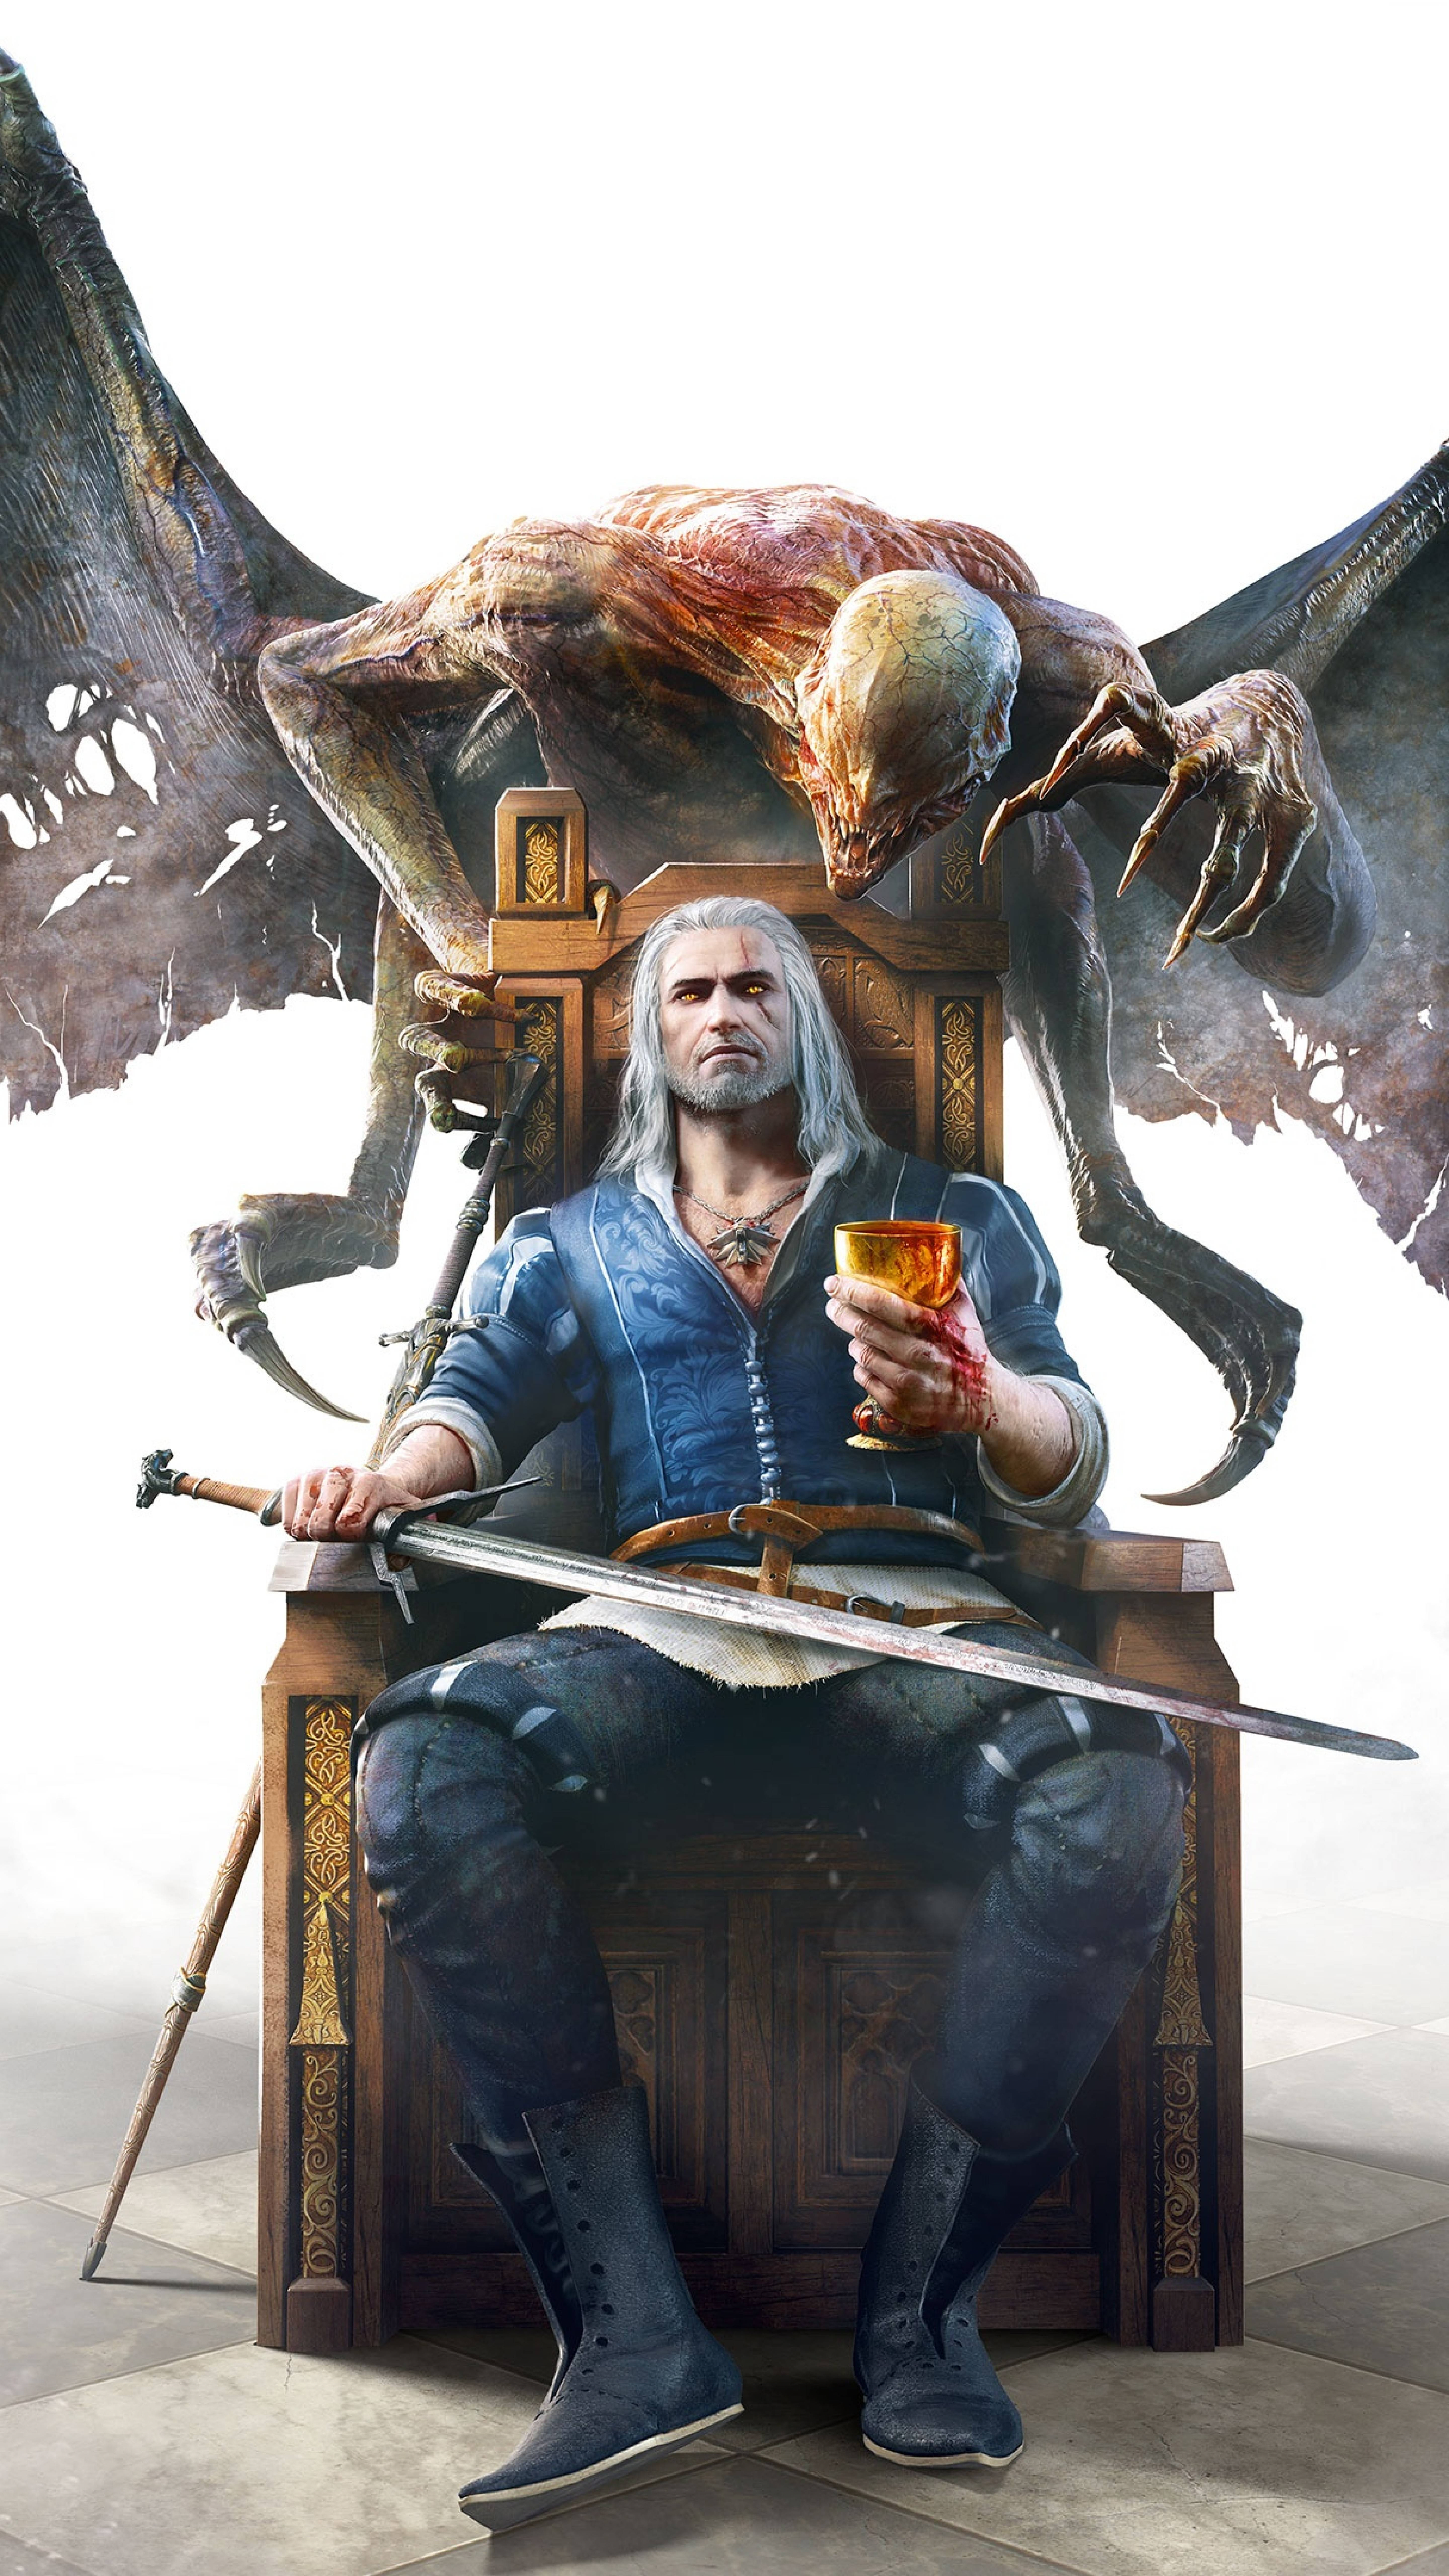 Witcher 3 Blood And Wine Poster - HD Wallpaper 